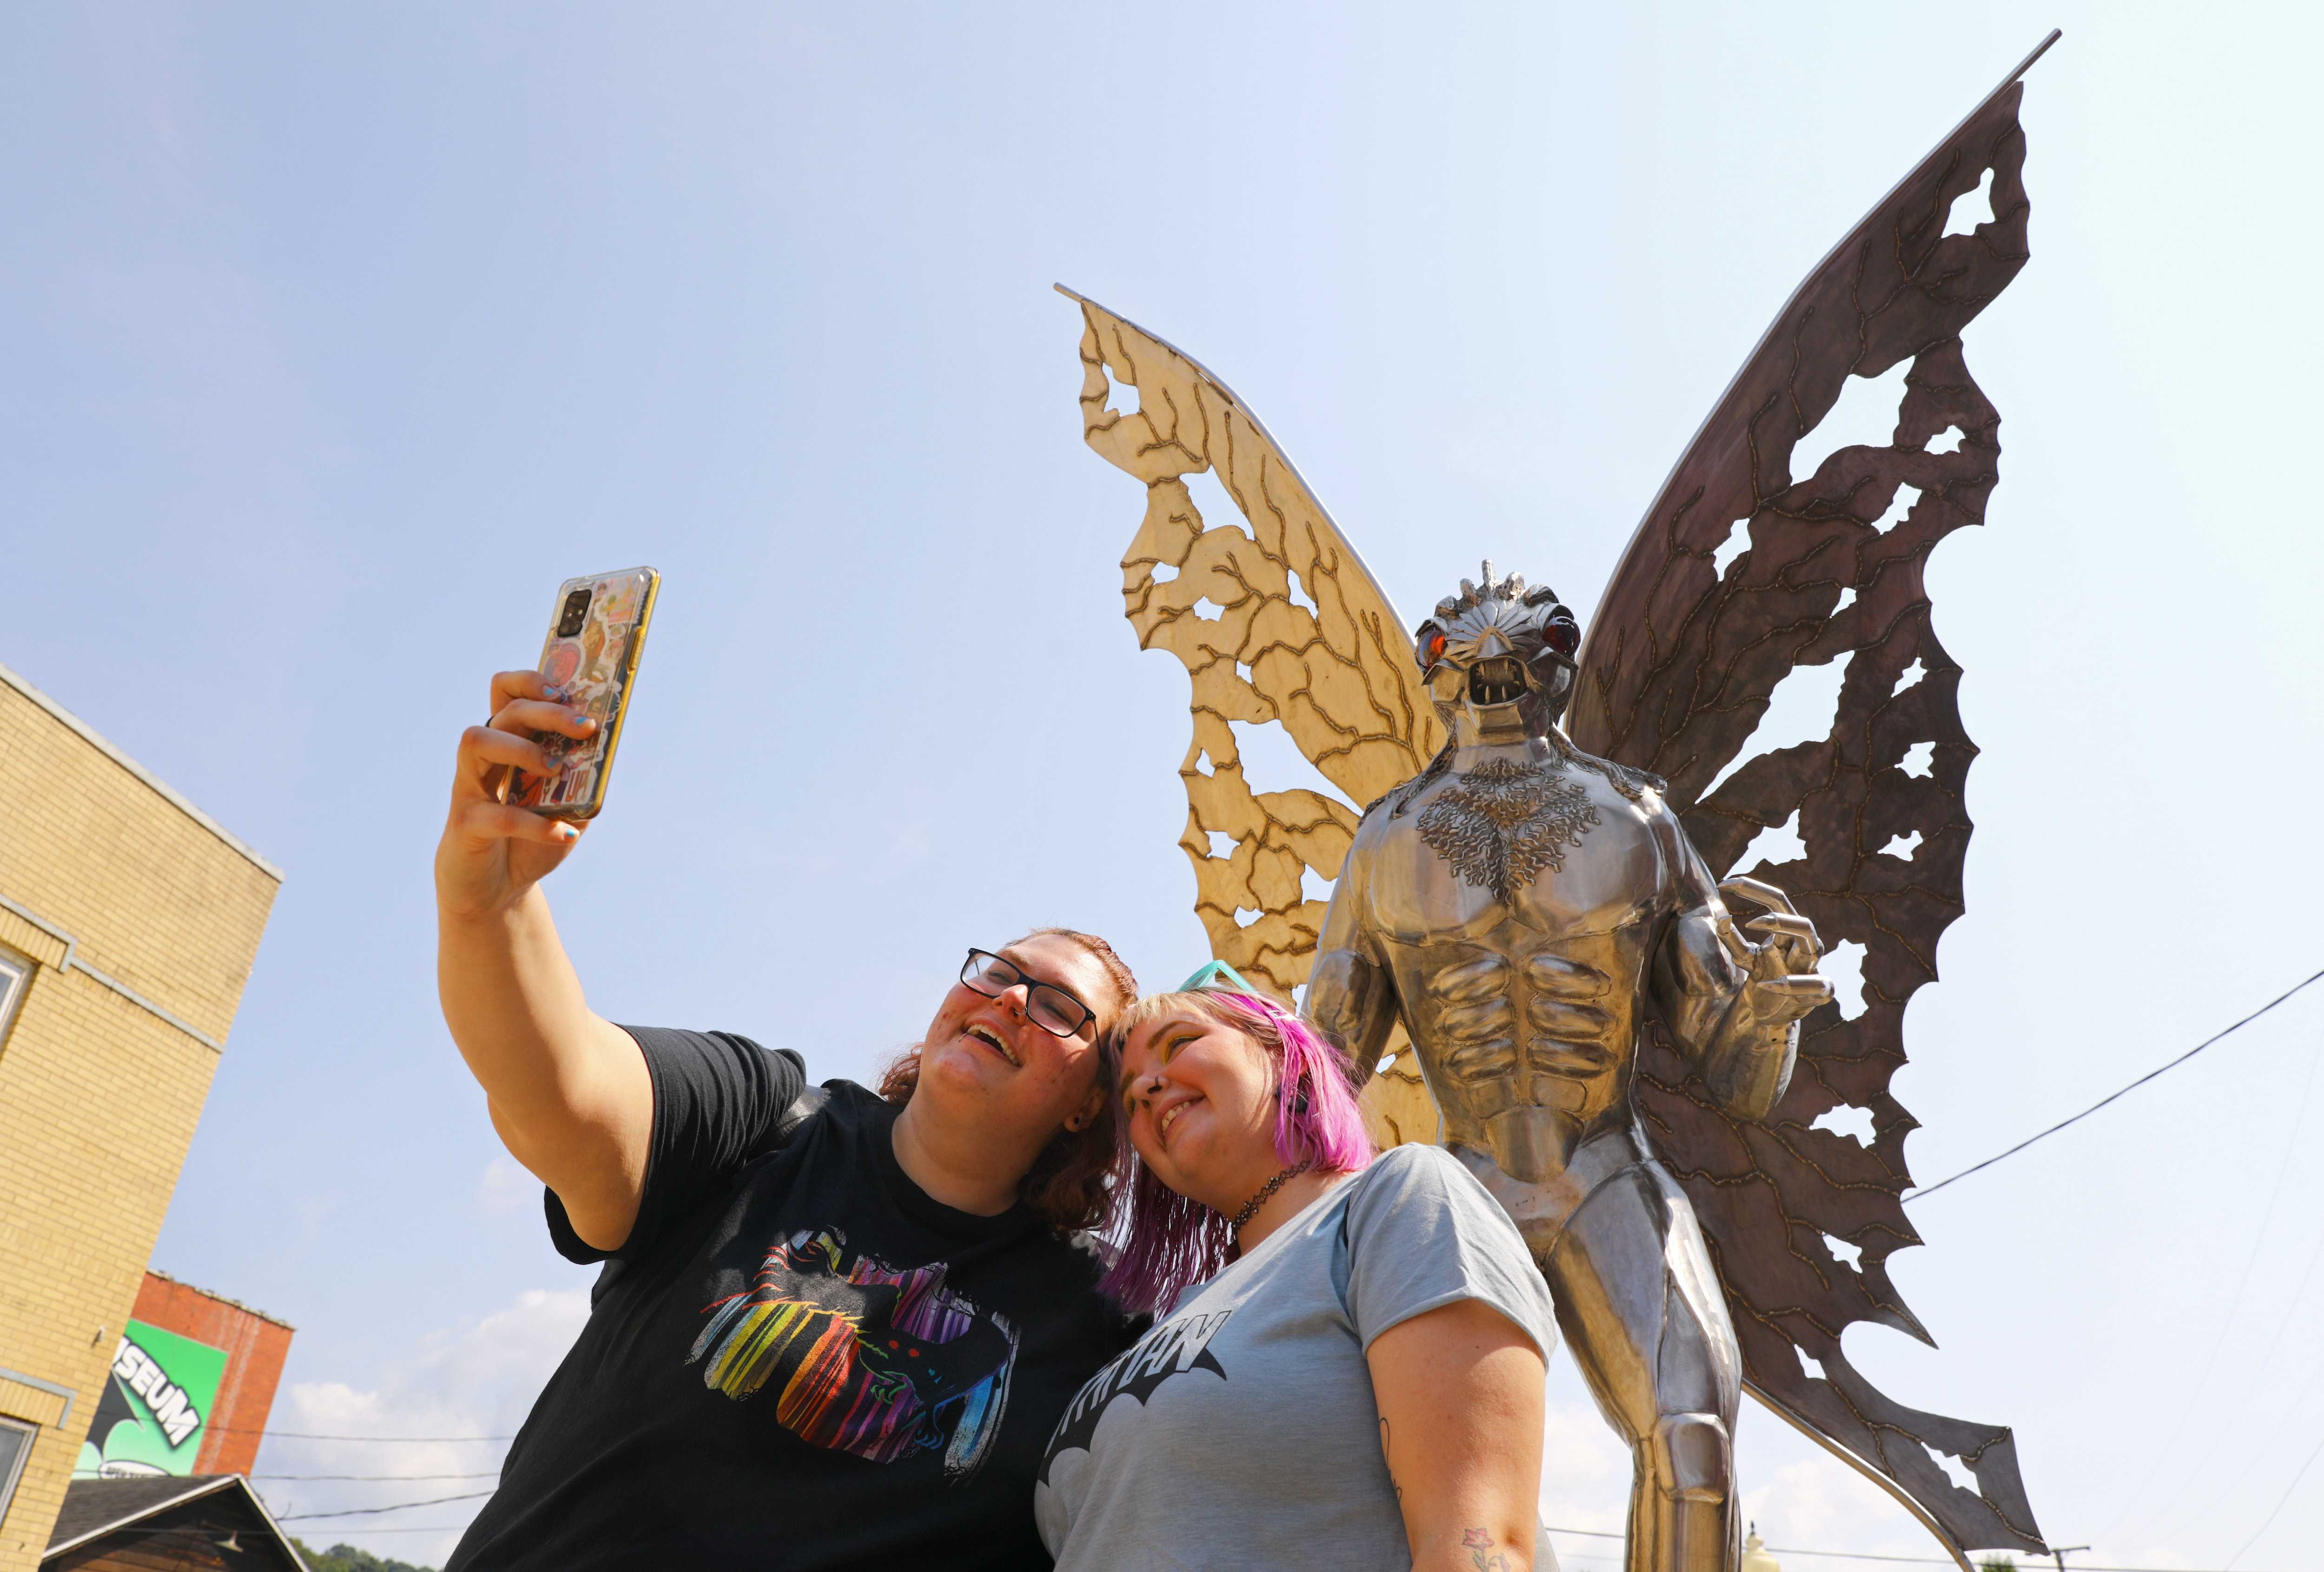 Renly Lee (left) of Fostoria, Ohio, and Trina Rosenberg took a selfie in front of Point Pleasant's Mothman statue.